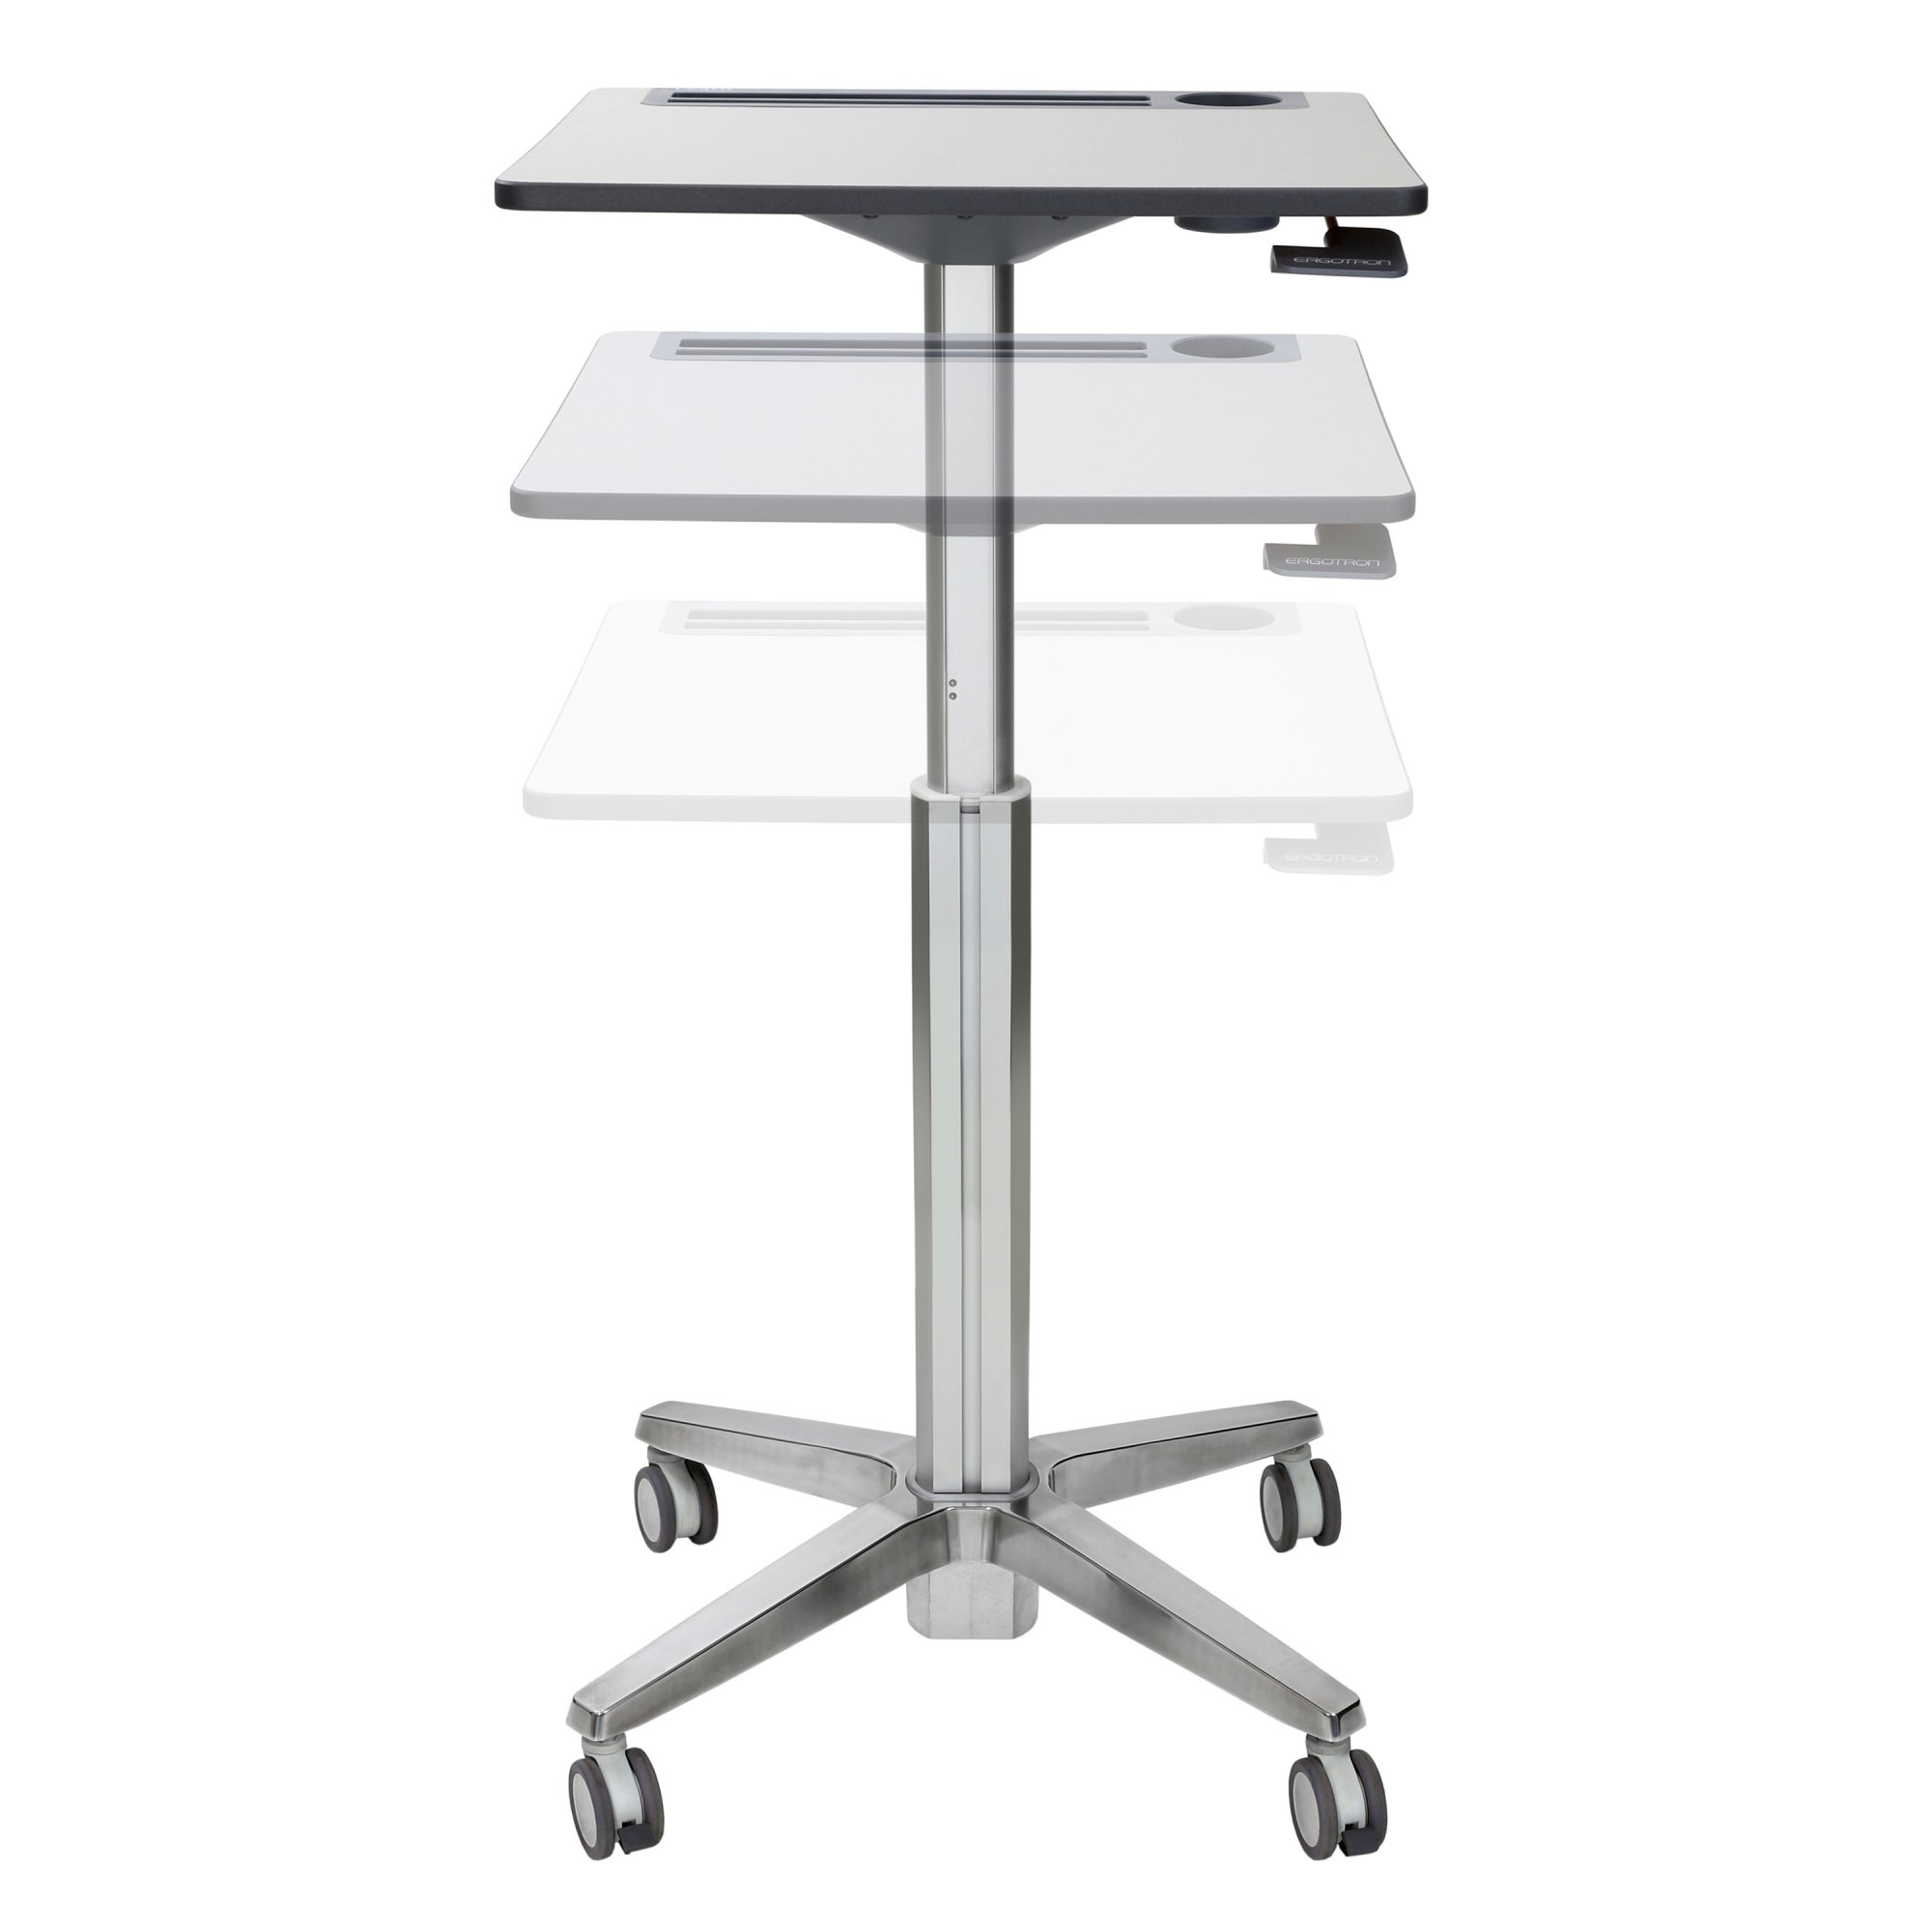 Ergotron 24-547-003 LearnFit Sit-Stand Desk for Students 6 years and over